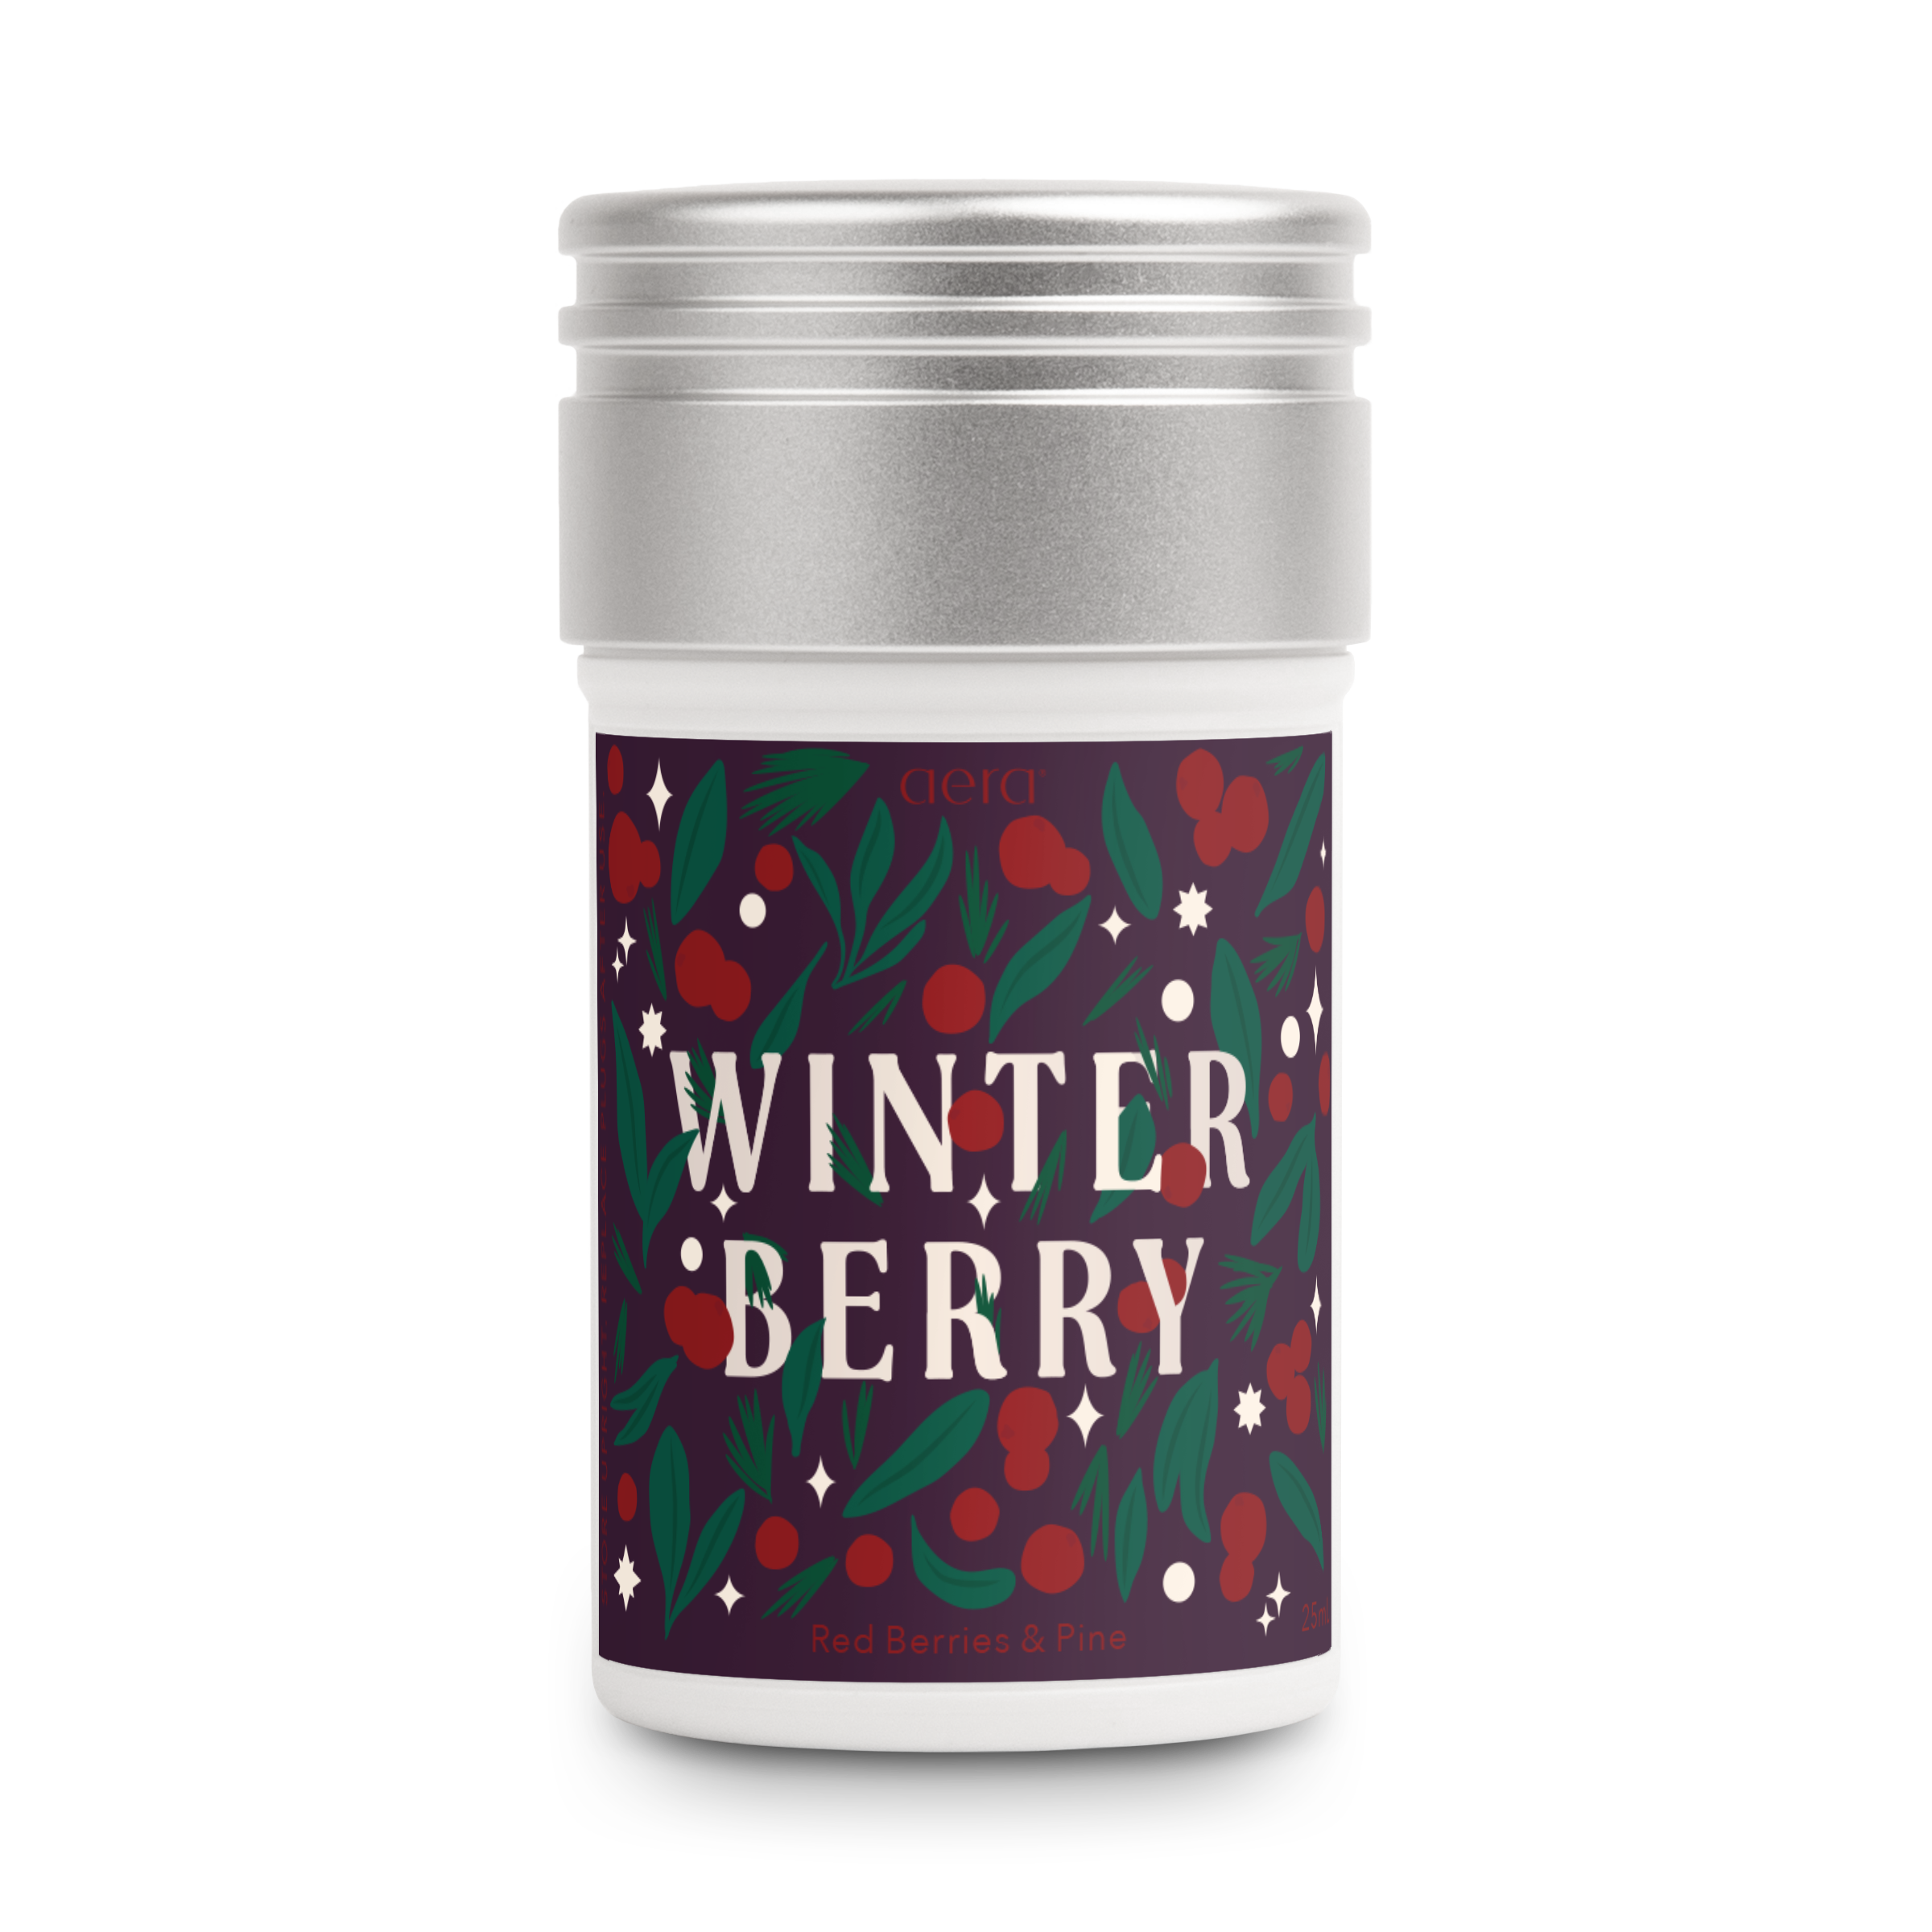 Winterberry: A fall and winter favorite